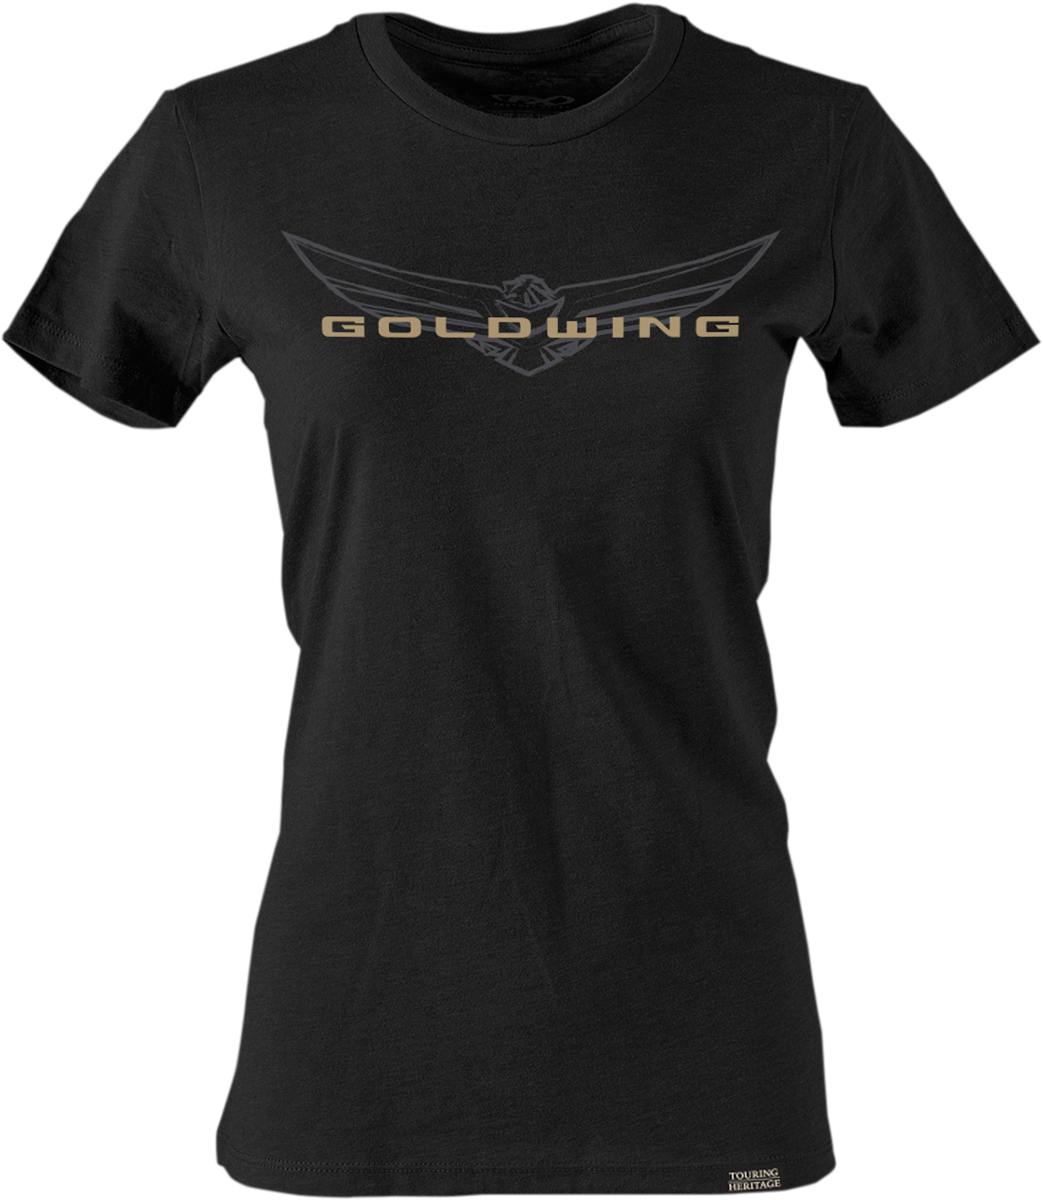 FACTORY EFFEX Women's Goldwing Sketched T-Shirt - Black - Small 25-87840